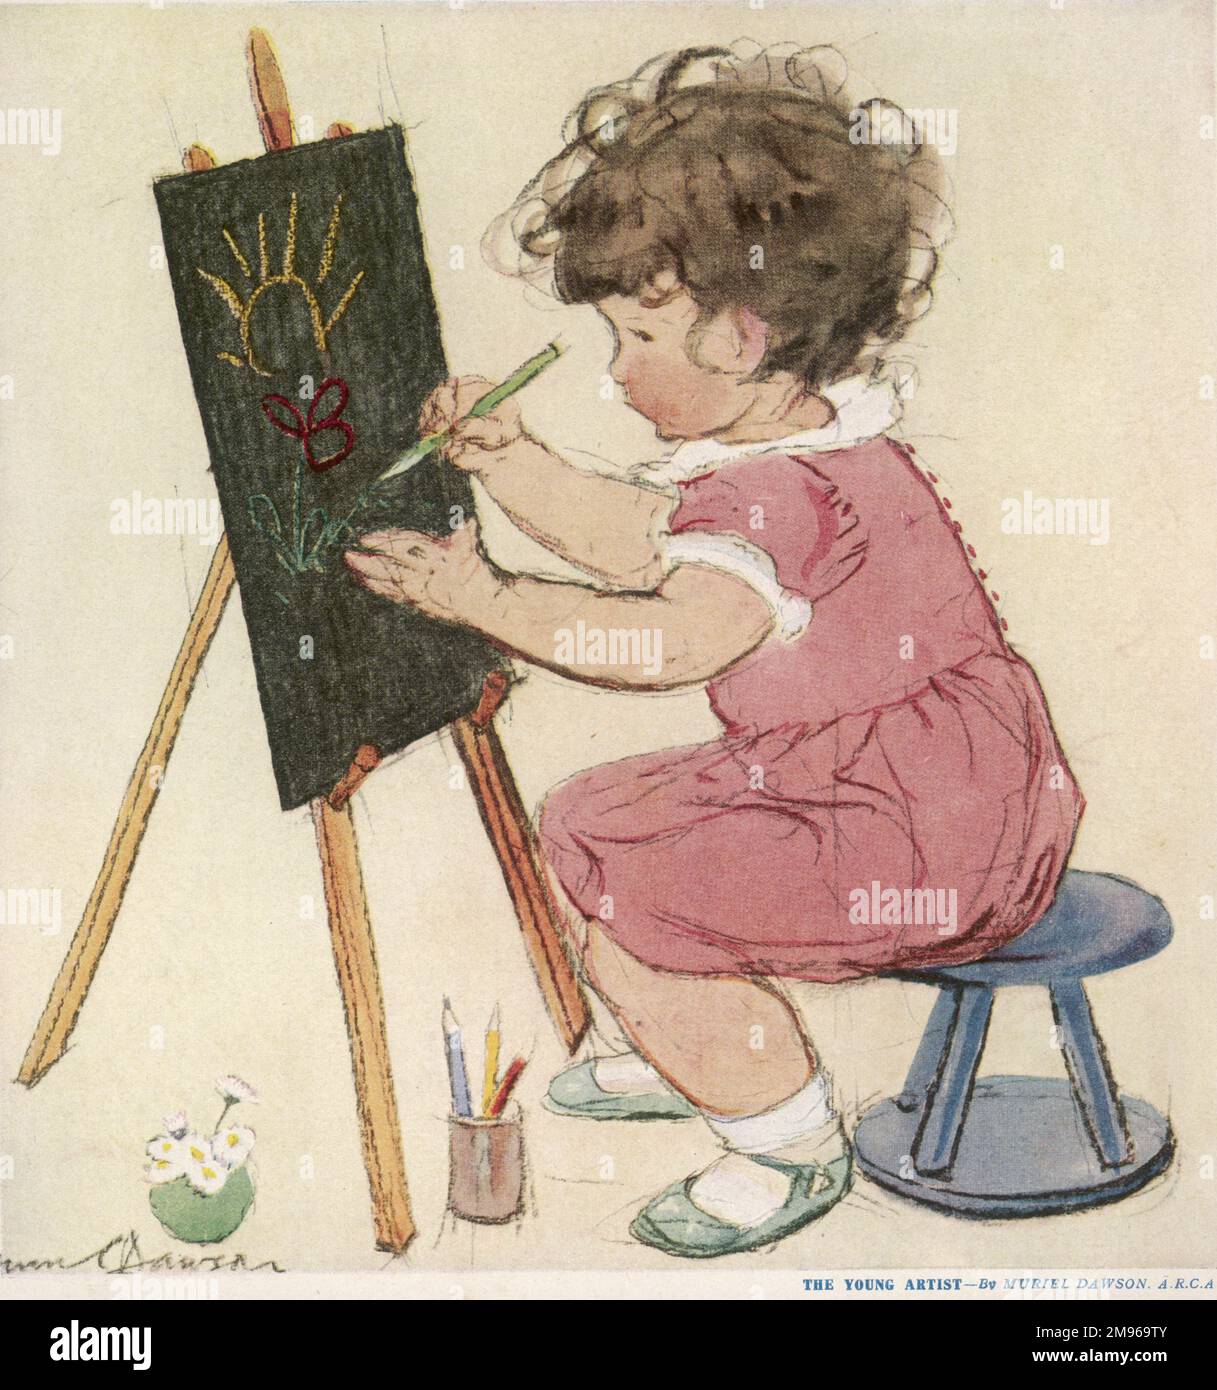 A little girl with brown curly hair, wearing a pink dress occupies herself drawing a sweet picture while sat at an easel. Stock Photo